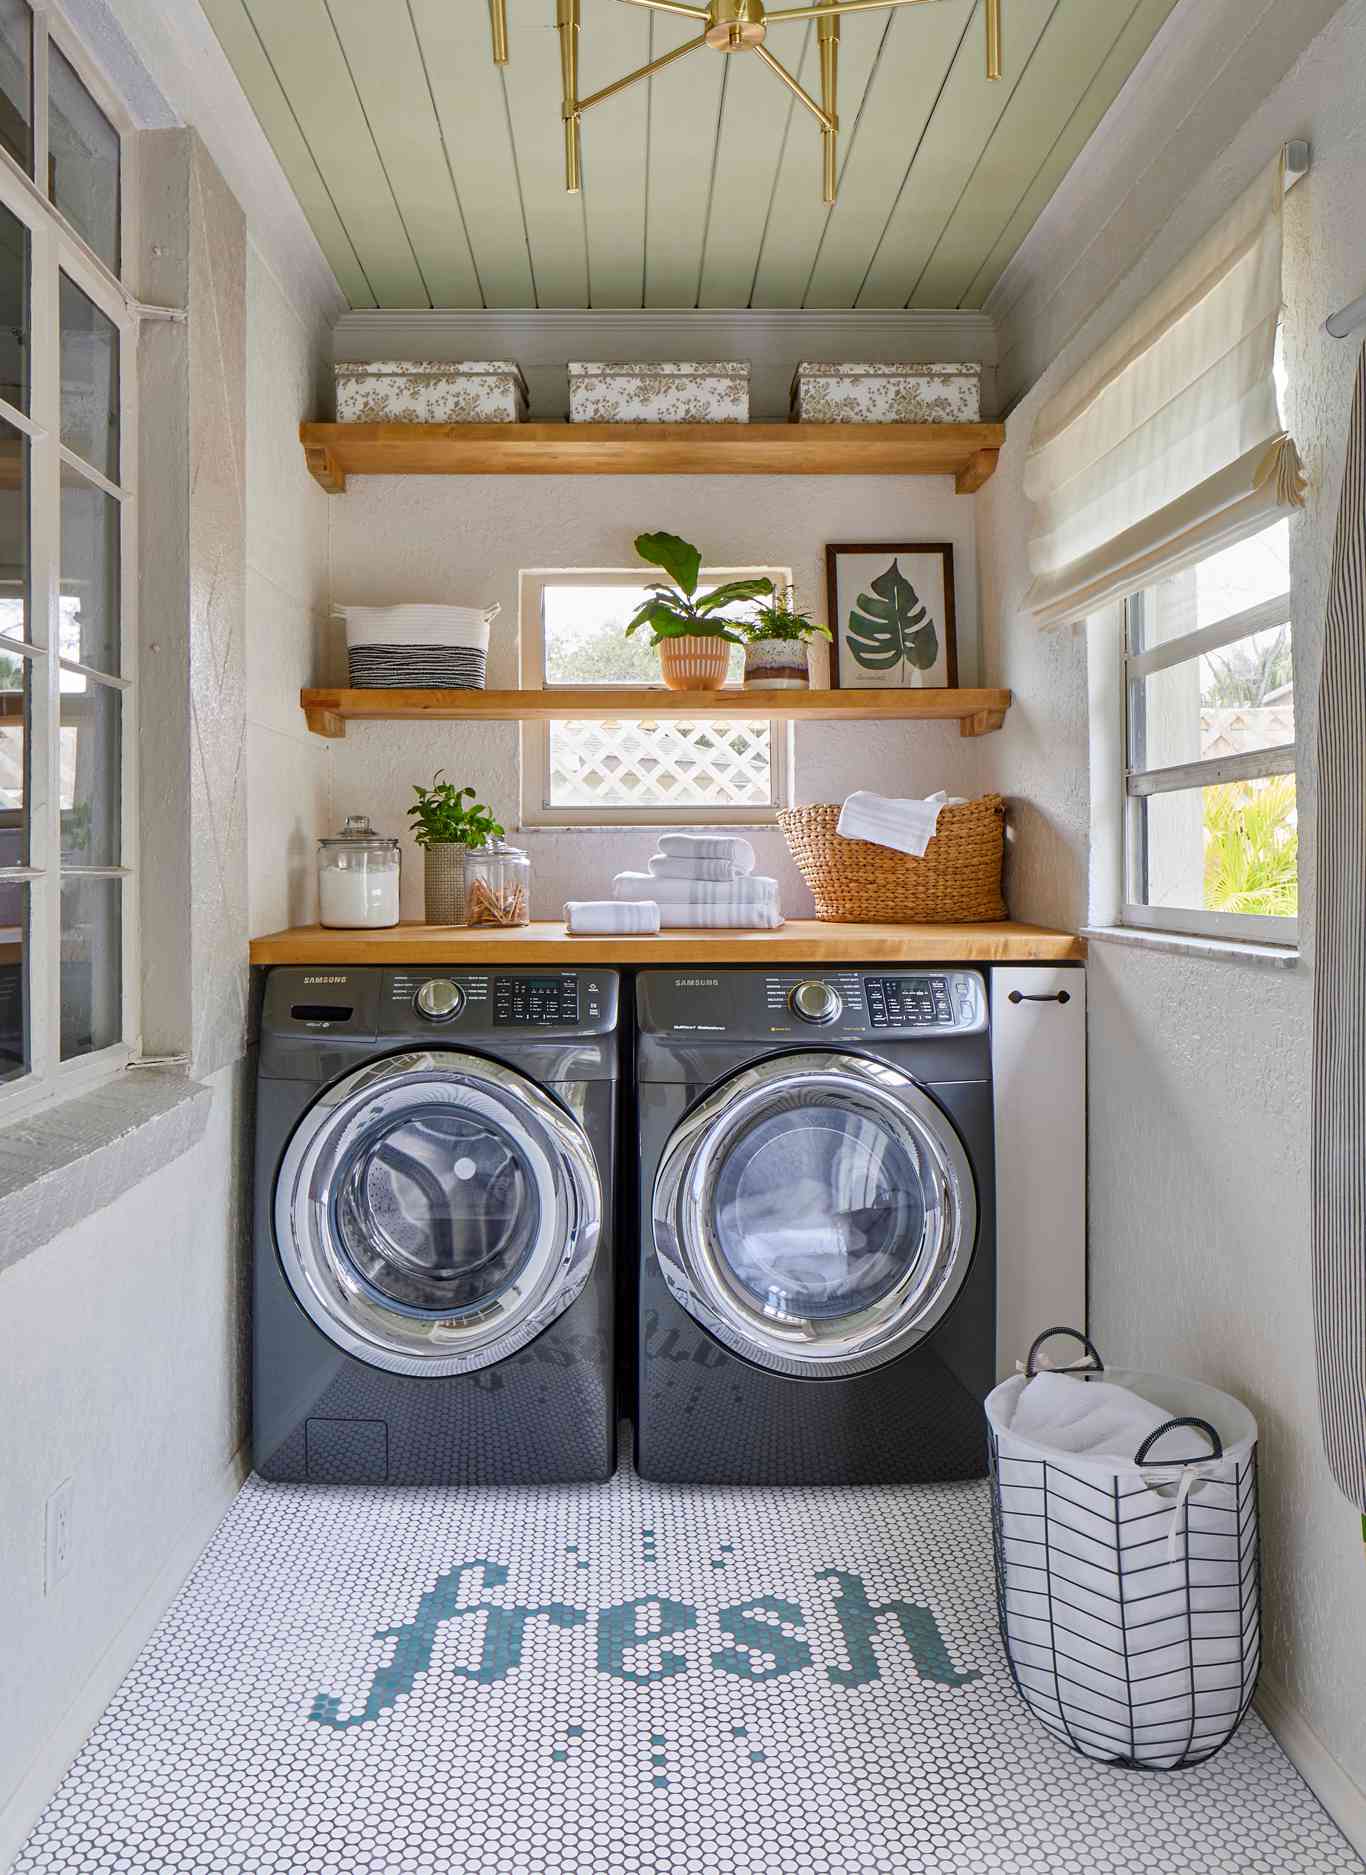 Where Should Your Laundry Room Be Located?